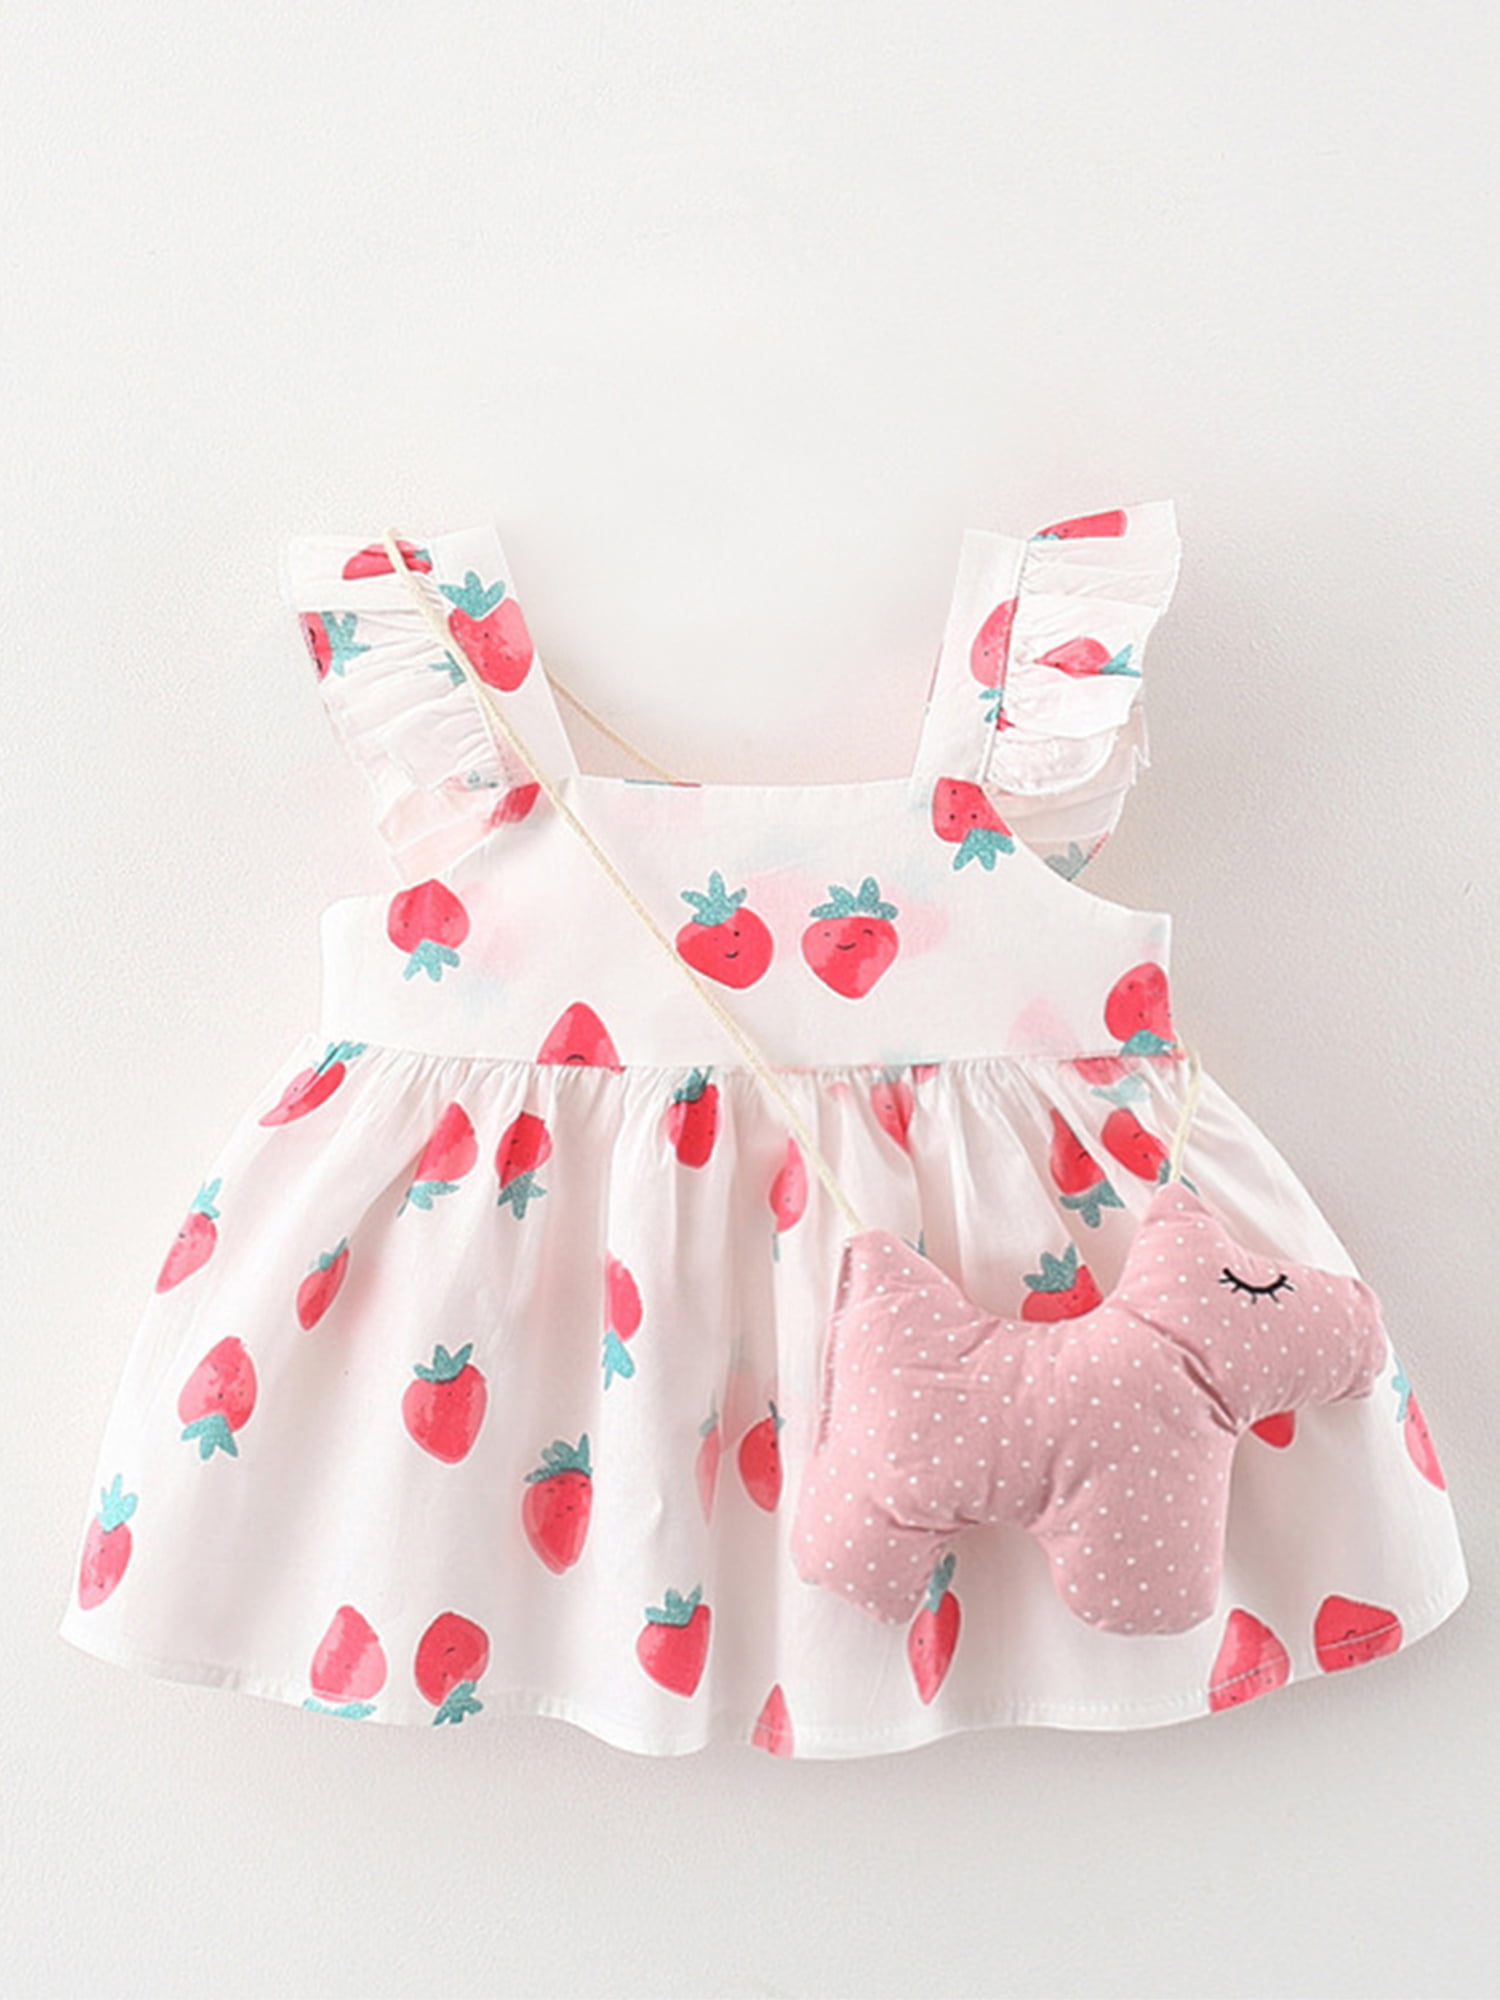 New Gucci Strawberry Dress Baby Size 12-18 Months